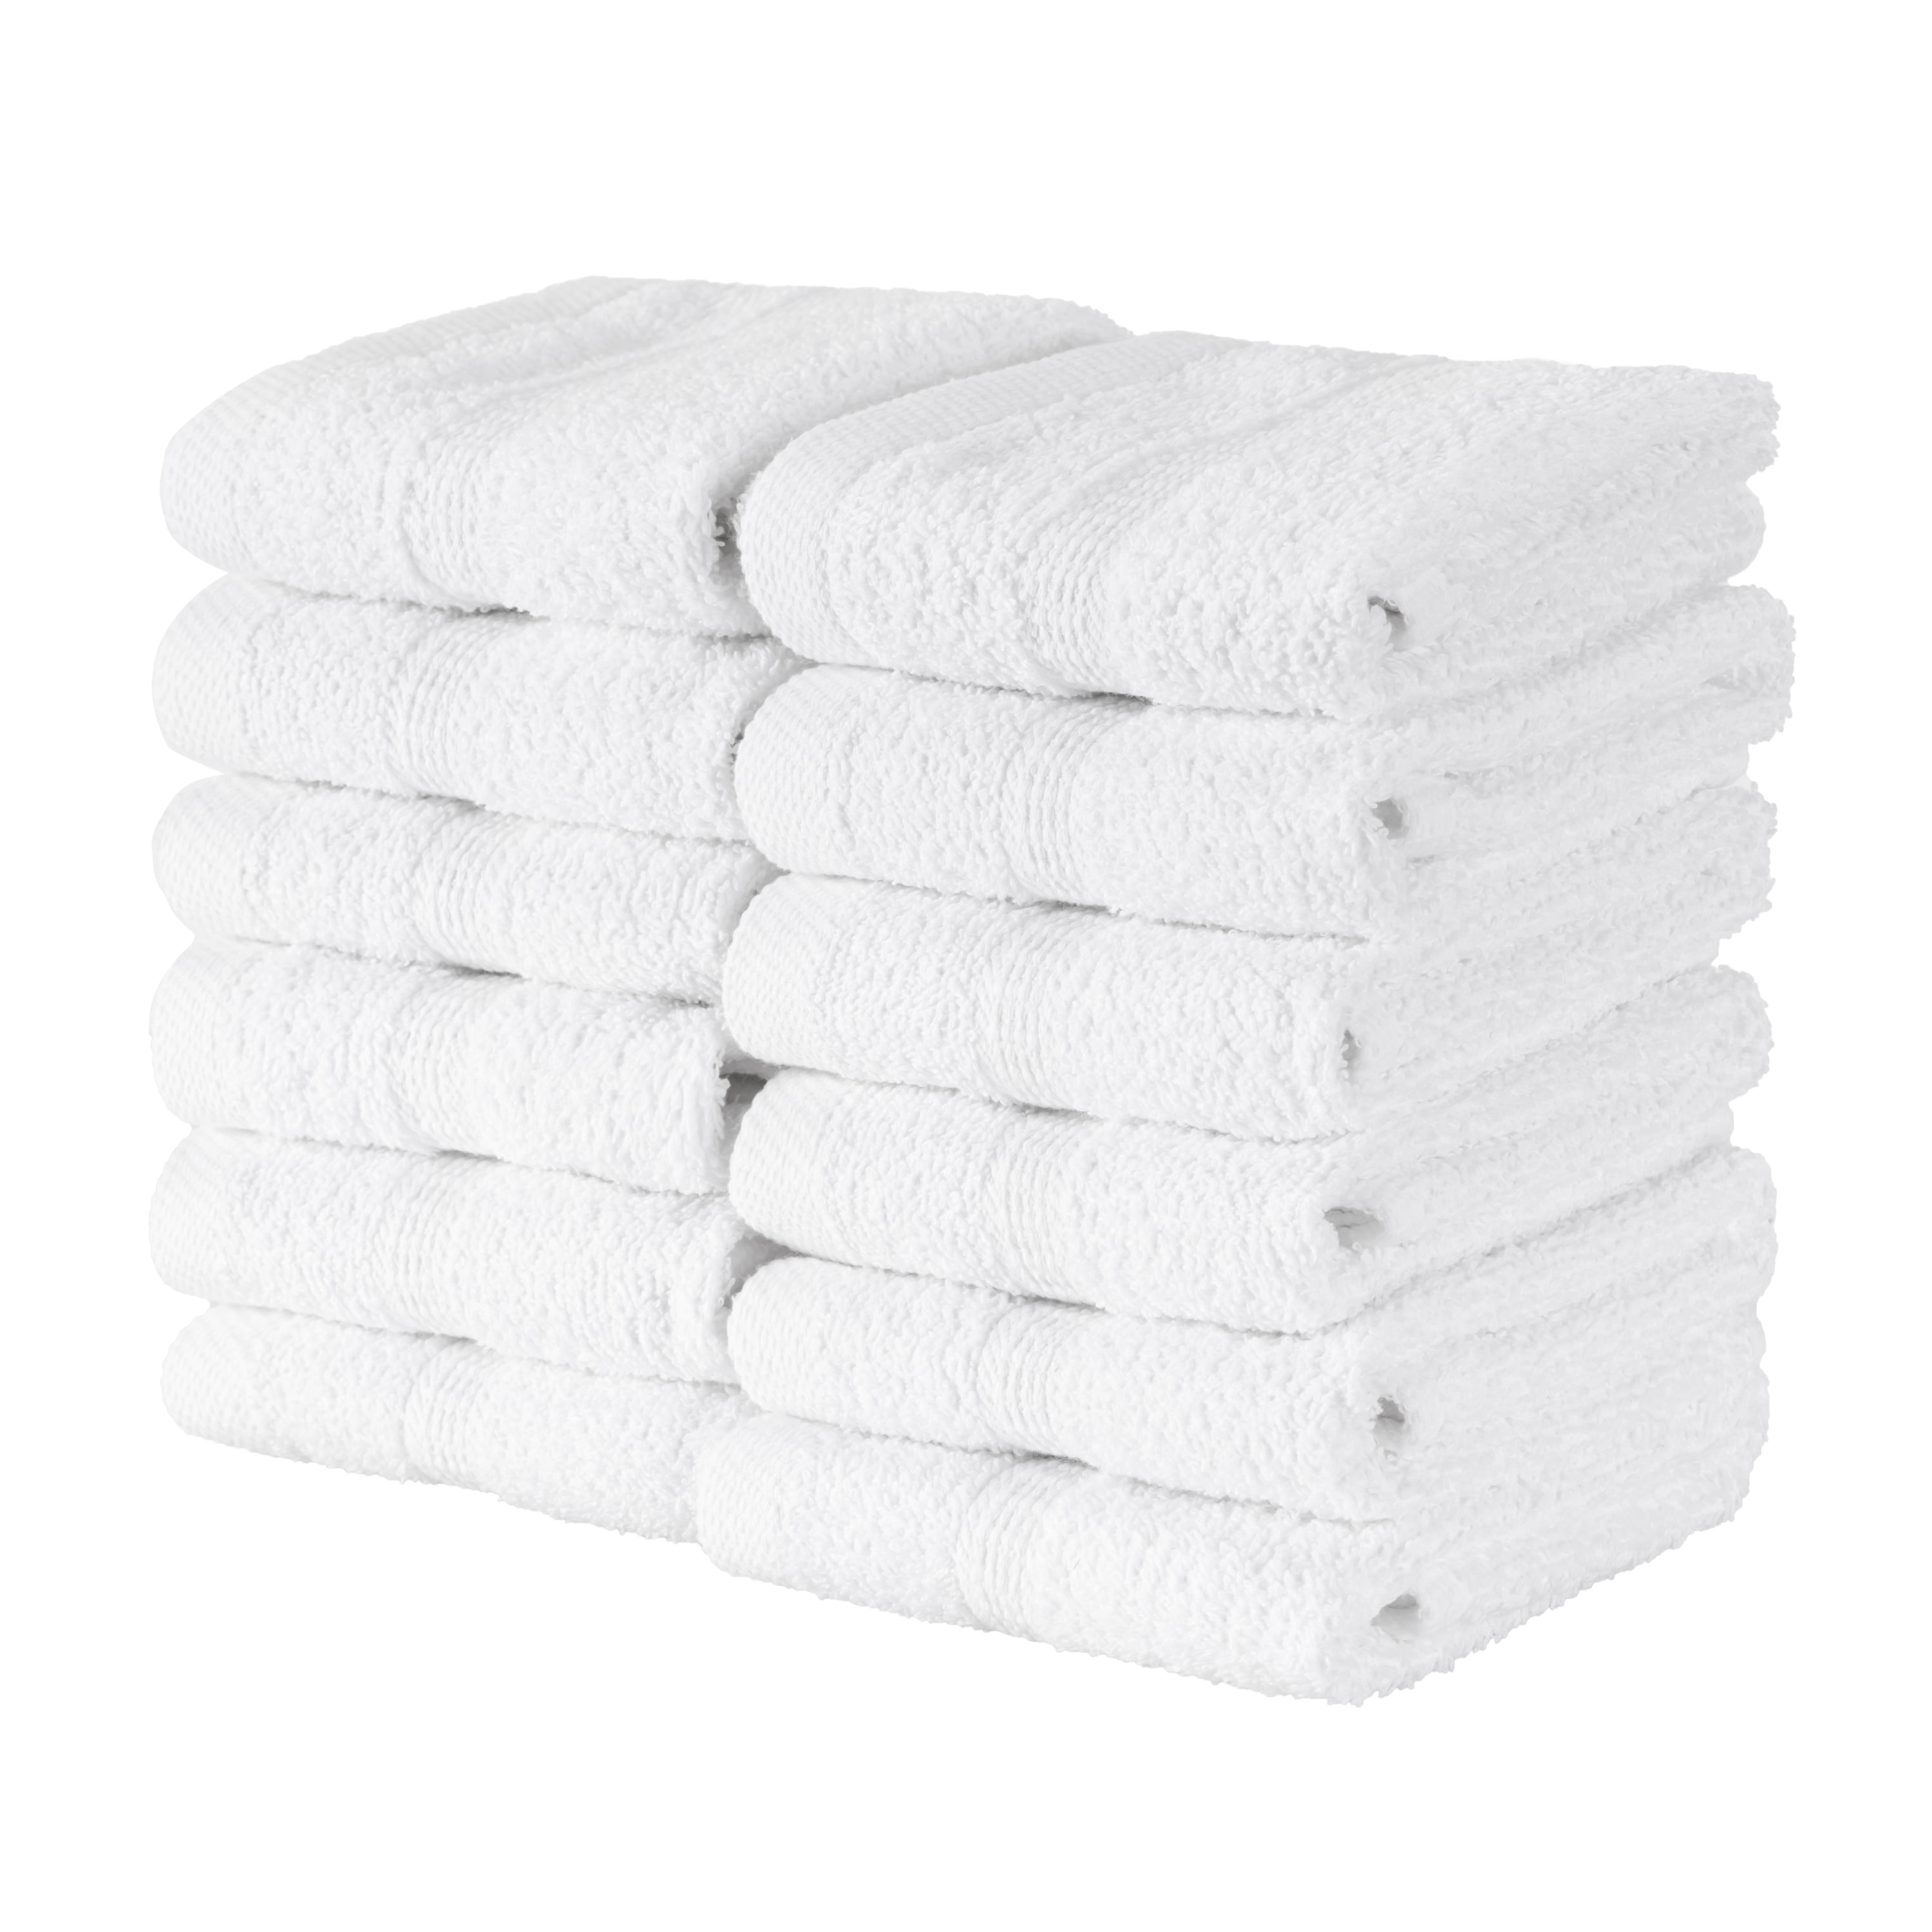 10 PACK WHITE WASH CLOTHS 12x12 INCHES QUALITY COTTON FACE TOWEL 